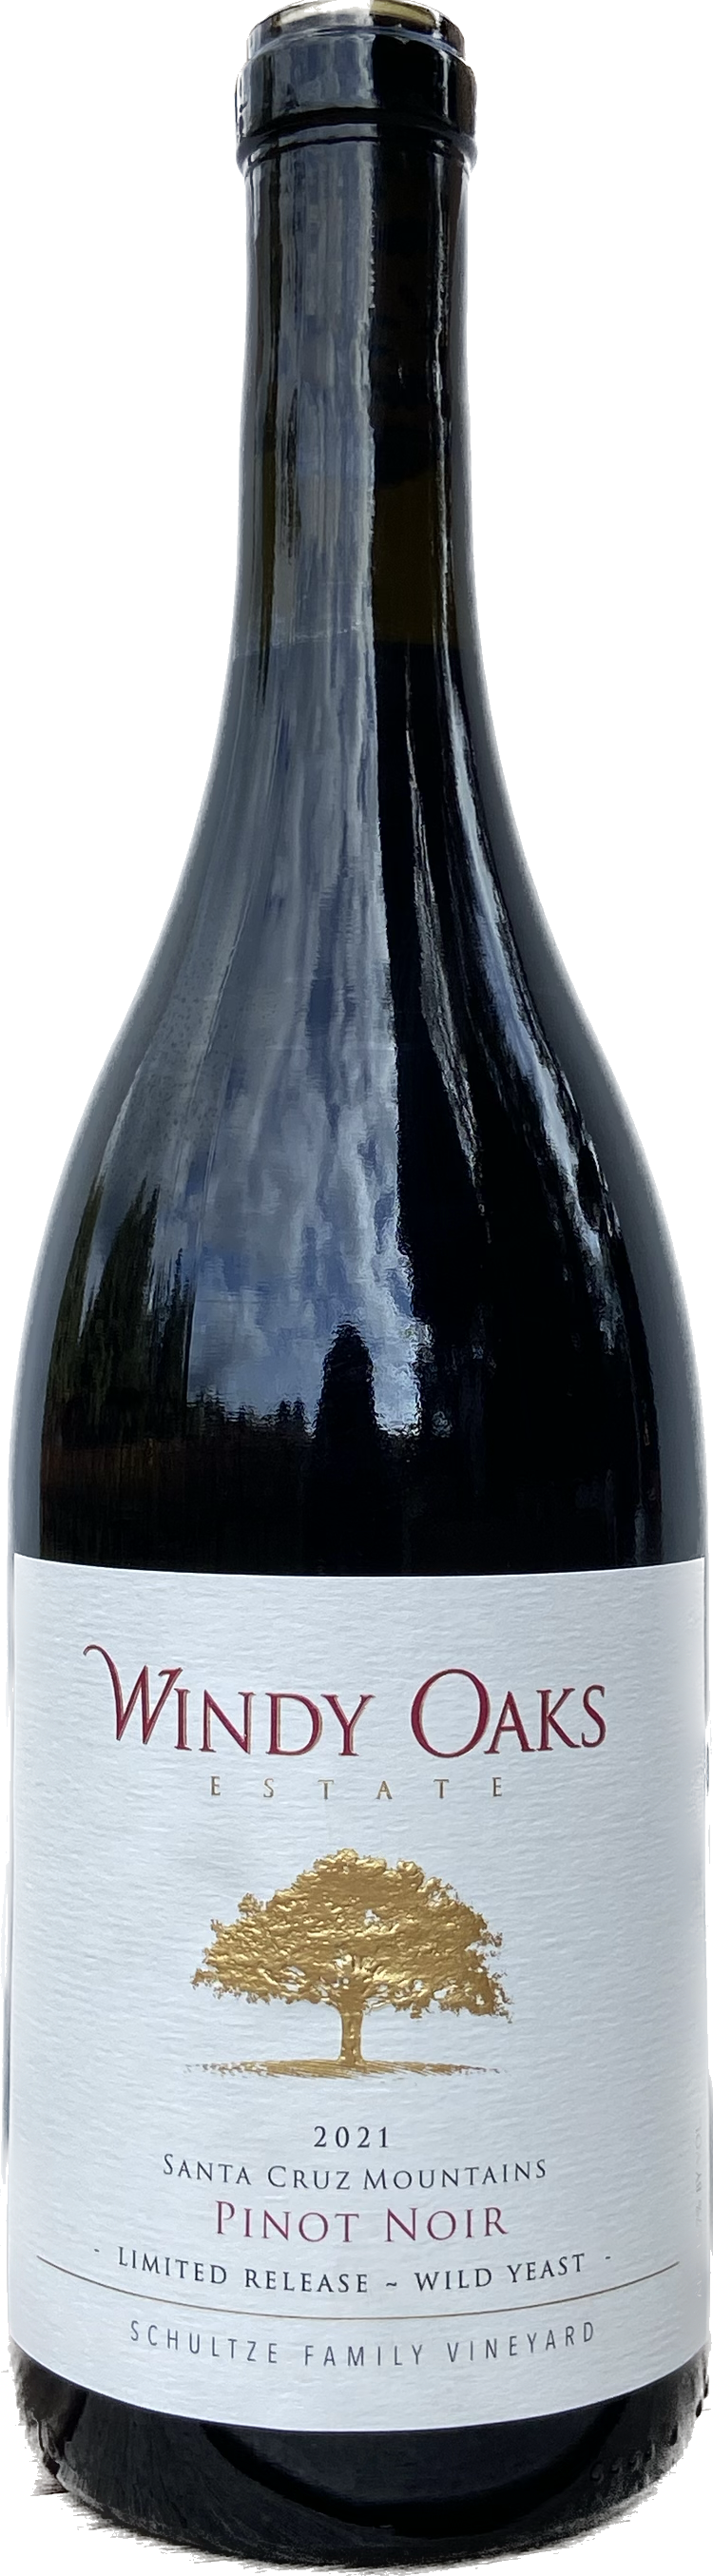 Product Image for 2021 Estate Pinot Noir, Limited Release, Wild Yeast